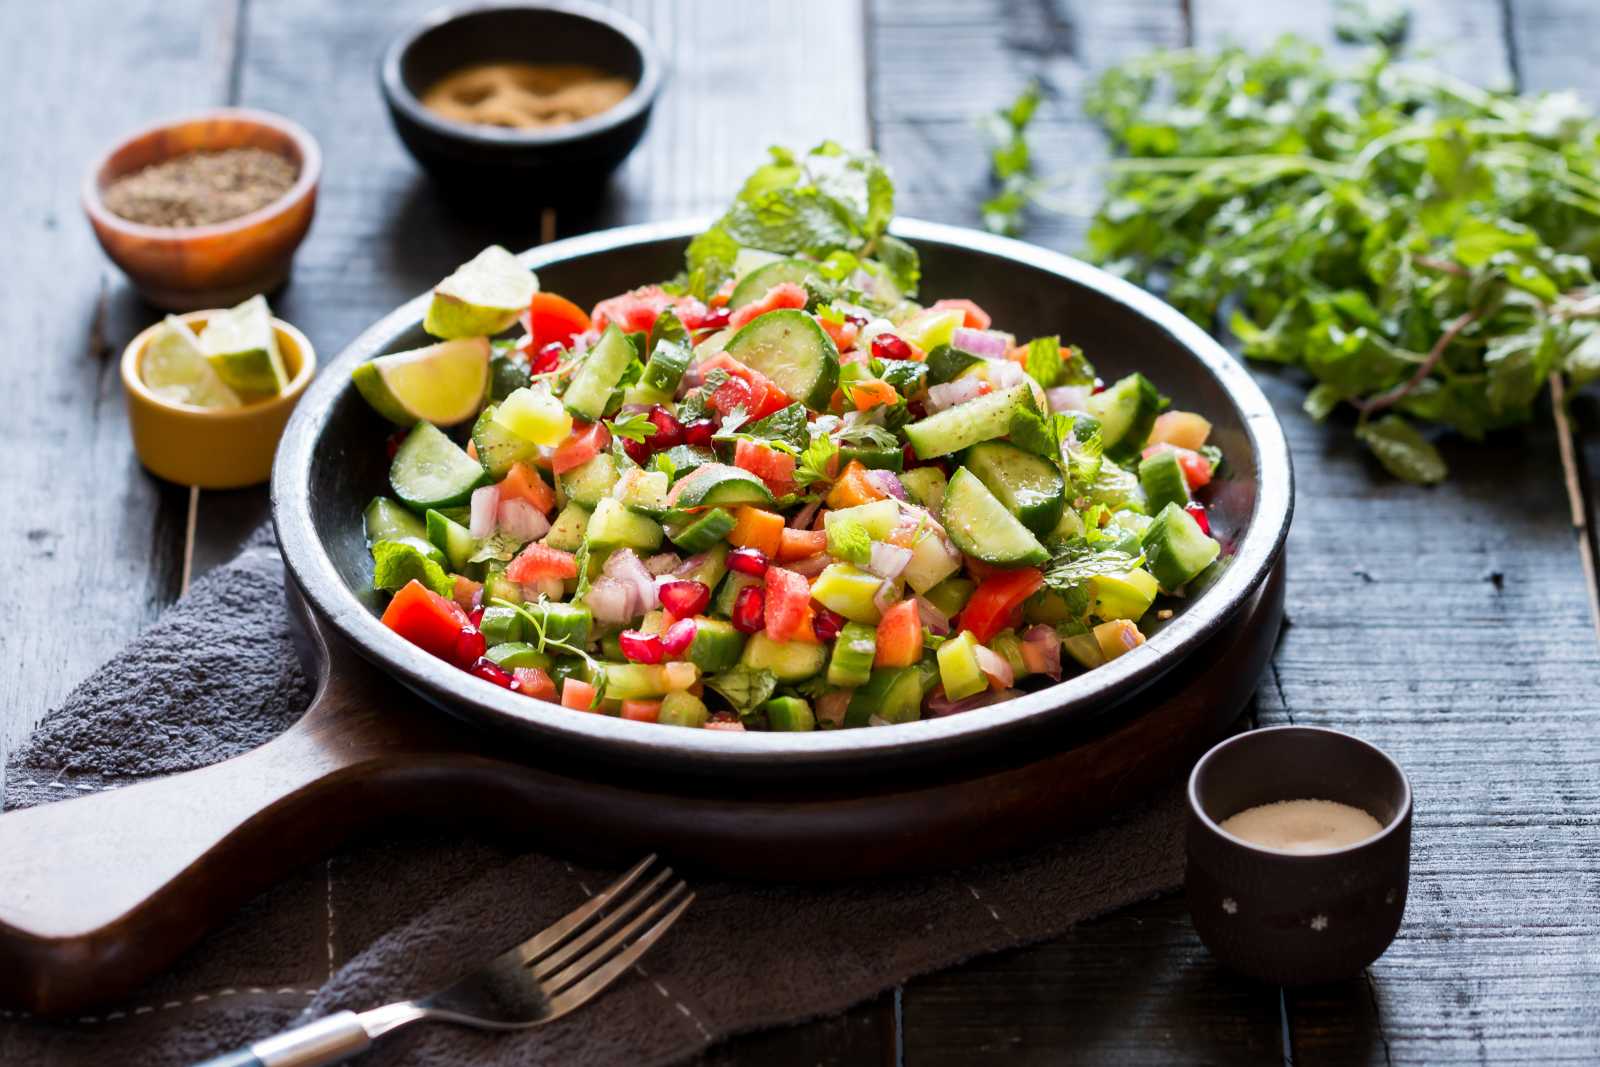 Kachumber Salad Recipe With Cucumber, Onion & Tomatoes